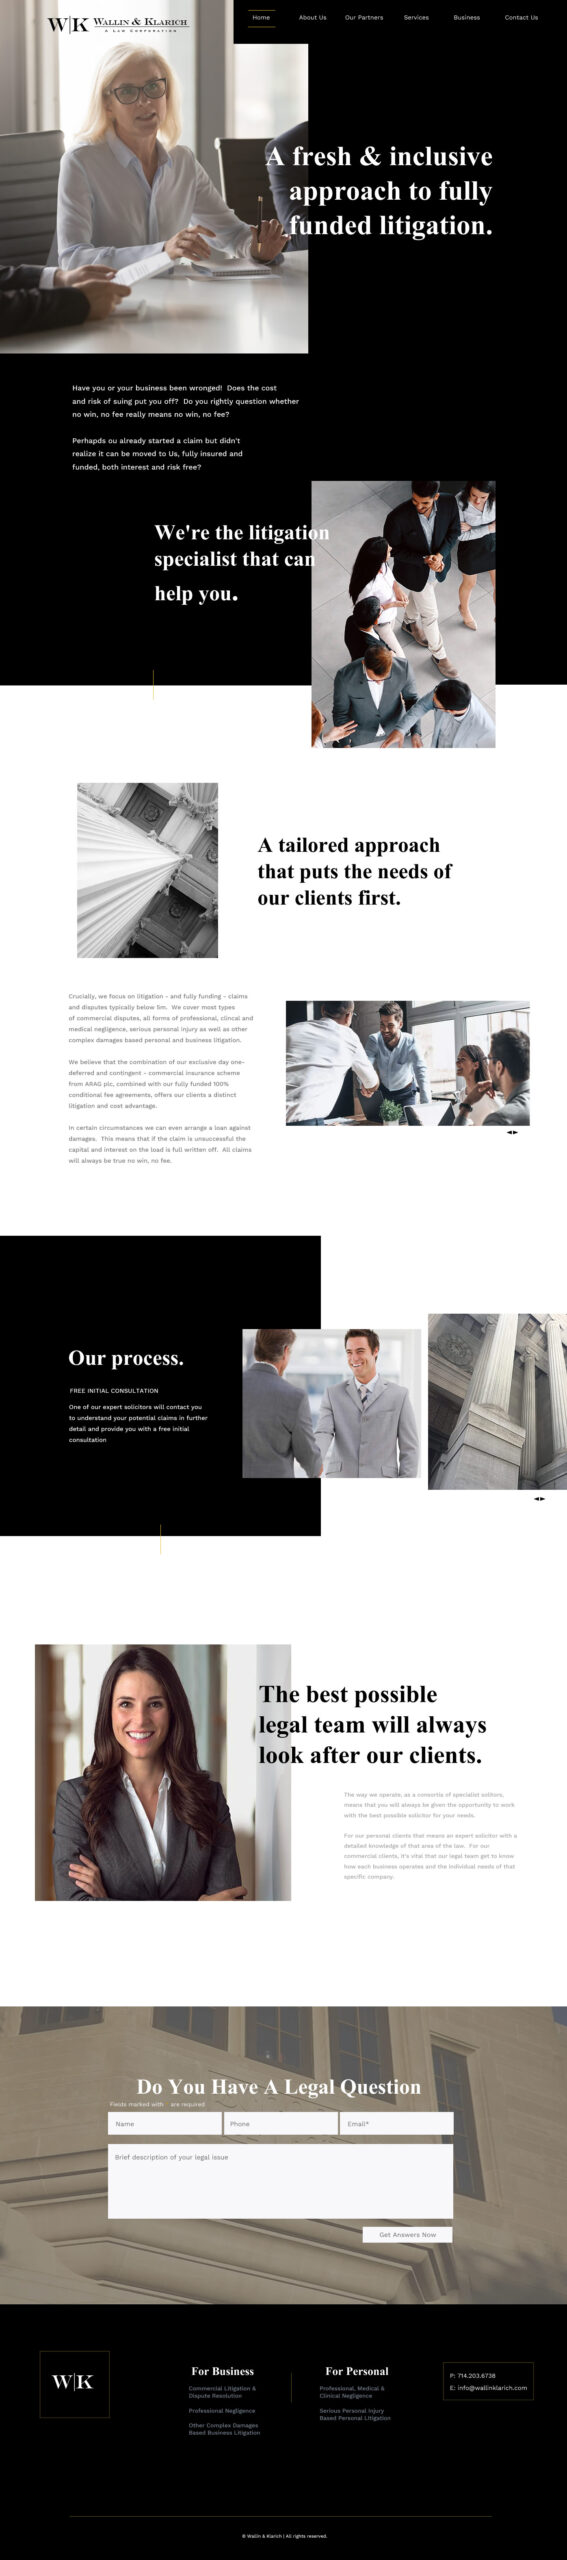 Law firm site design